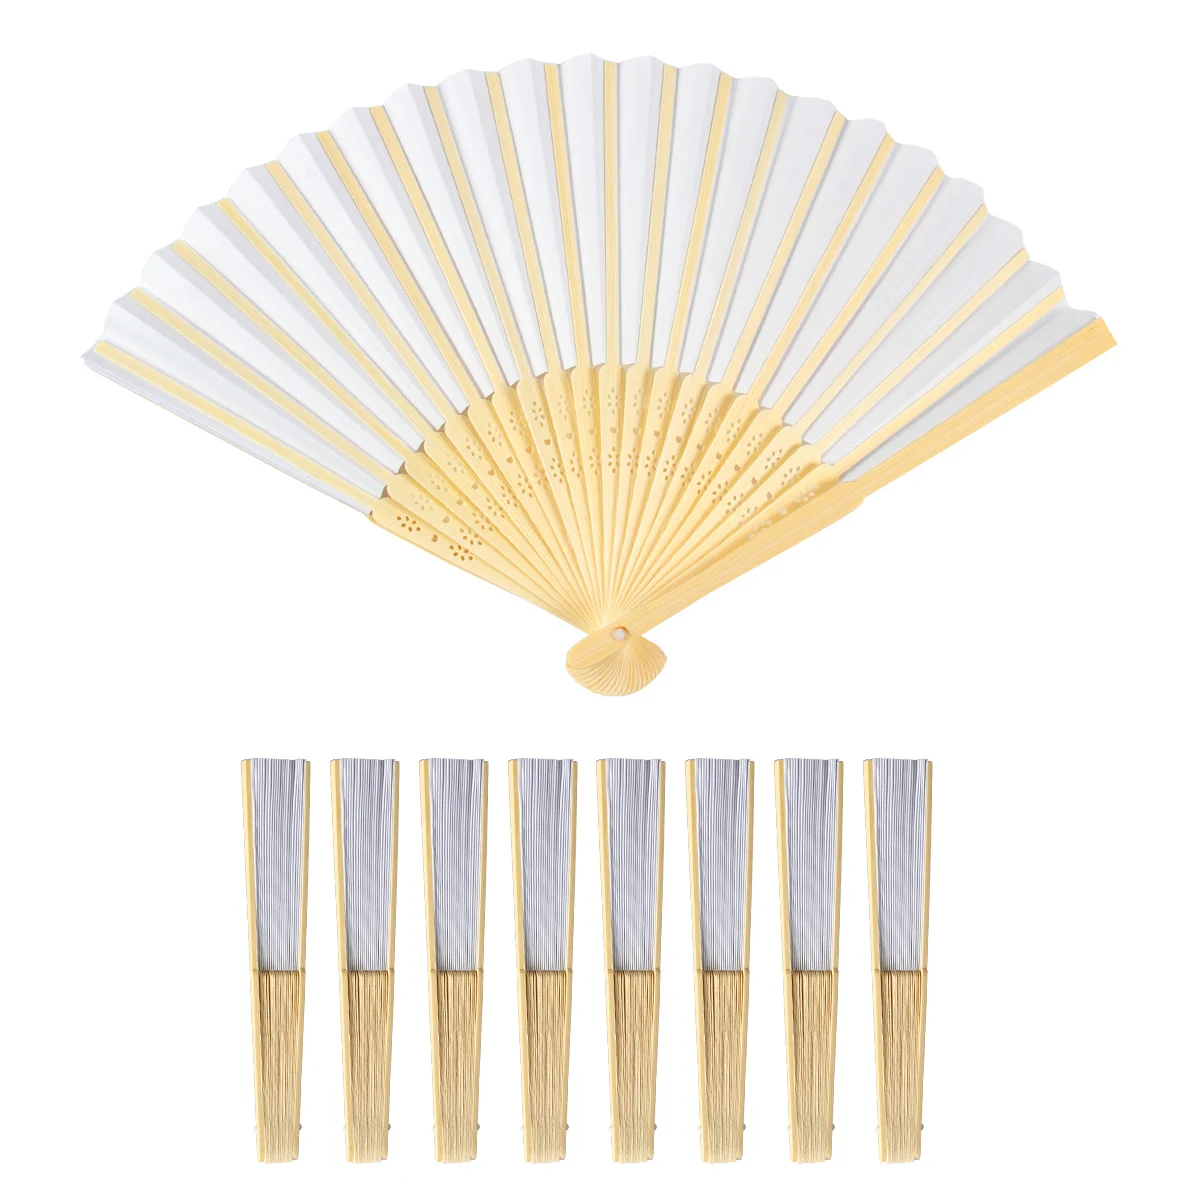 5pcs White Foldable Paper Fan Handheld Portable Bamboo Folding Fans Wedding  Gifts for Guests Kid Home Birthday Party Decorations